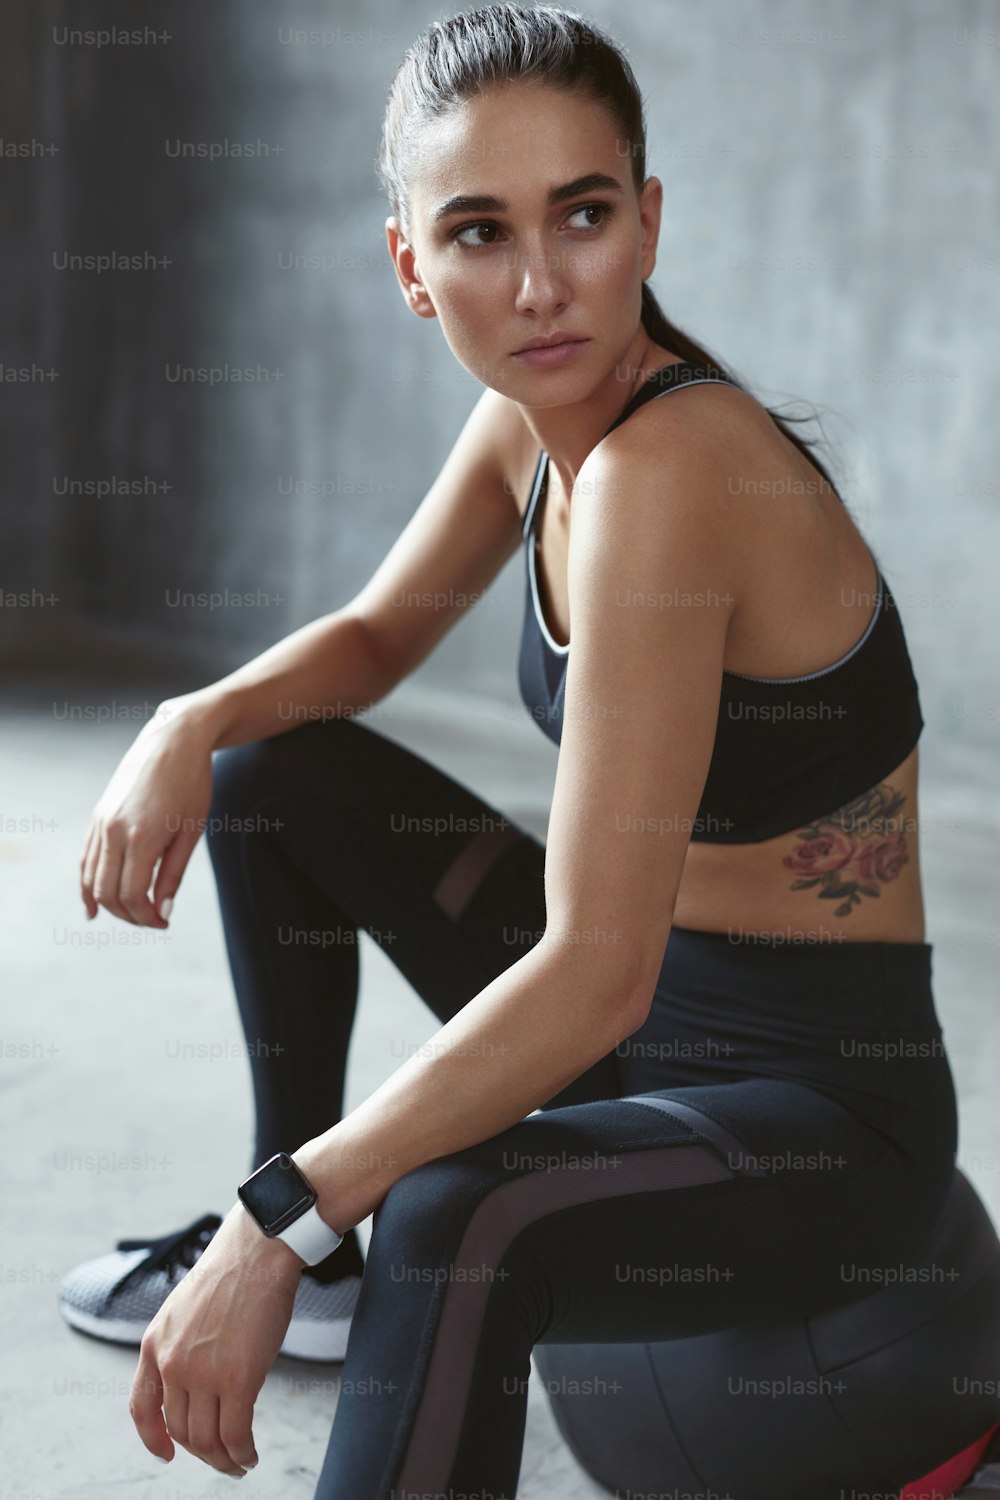 Fitness Woman In Fashion Sportswear Sitting On Med Ball After